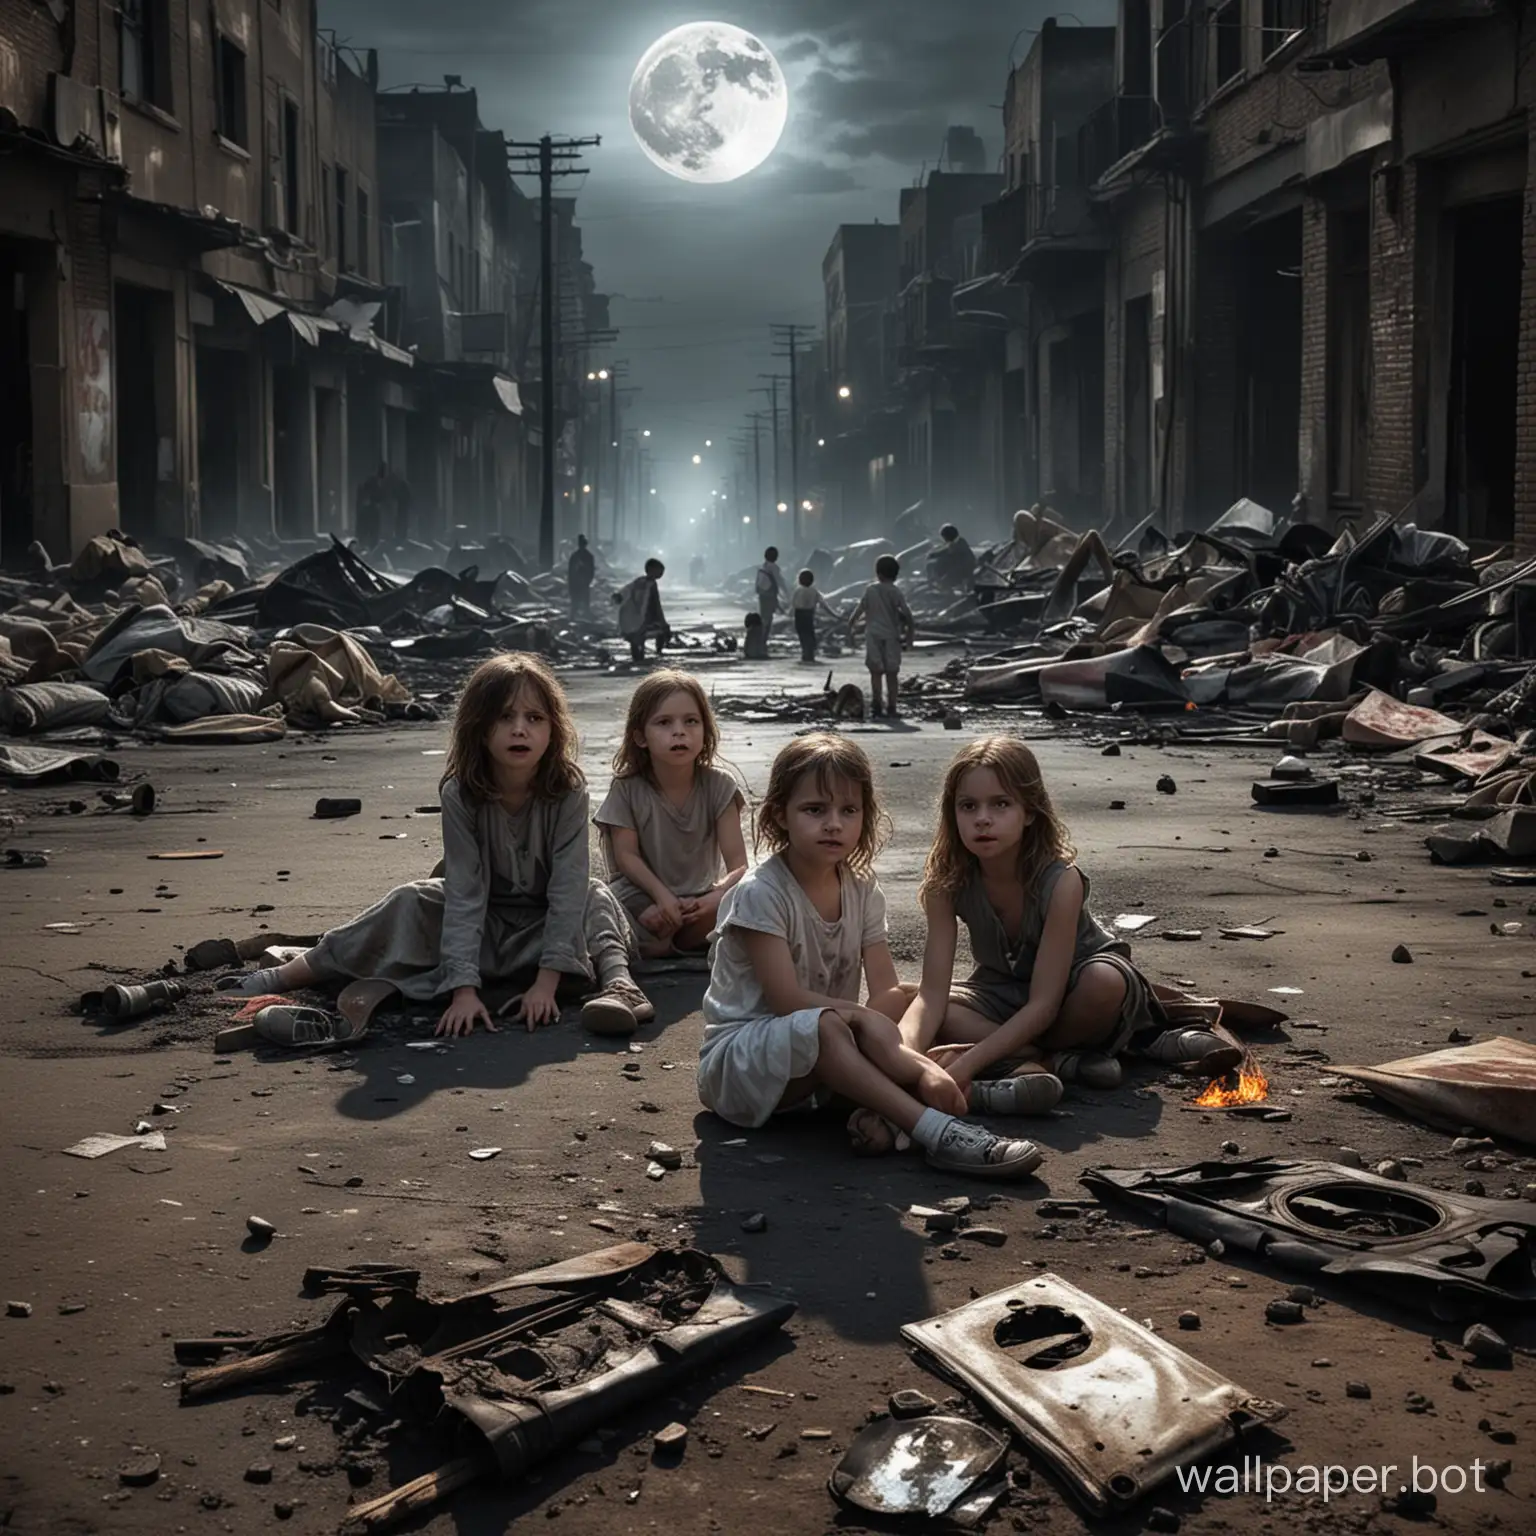 Describe a picture of a war zone, set in an urban environment, there is a full moon reflecting what is happening on the ground. Crying children sit on the ground, around them are burnt-out cars. Above the children, the angel Lucifer hovers, the angel is dark and transparent, Lucifer smiles.